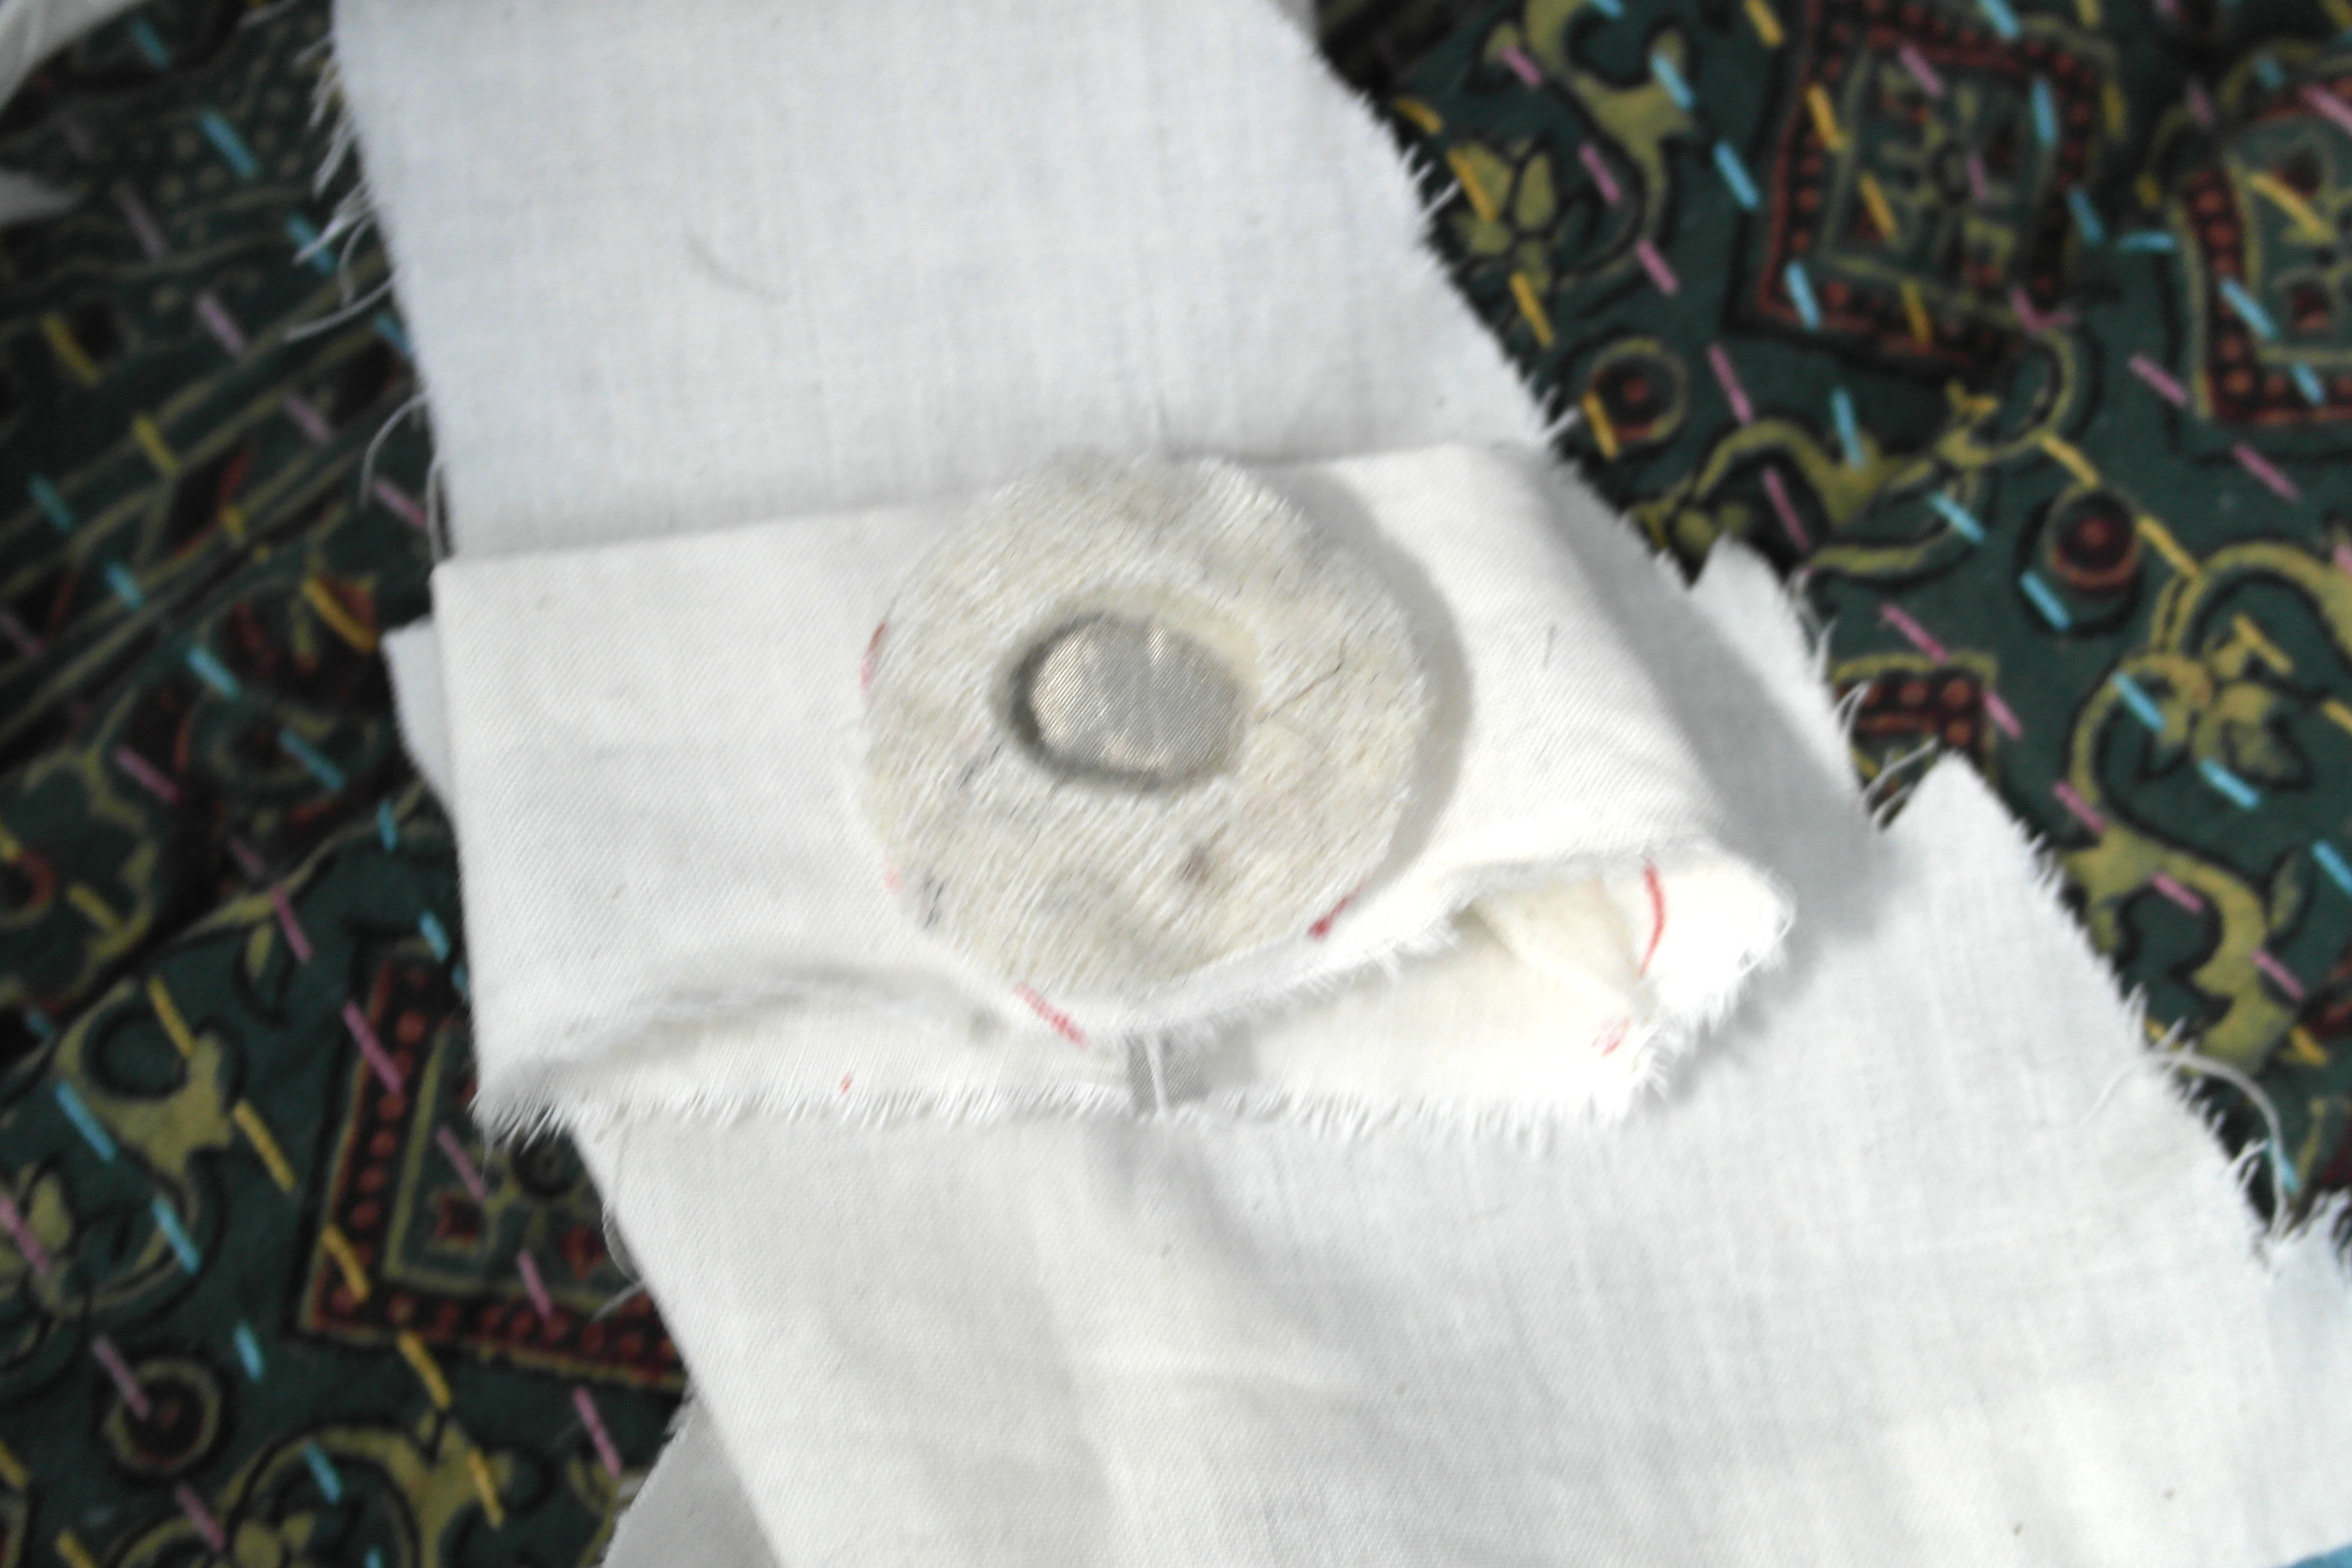 2. Make a hole in the thin fabric and sew the circle from Step One into the center.